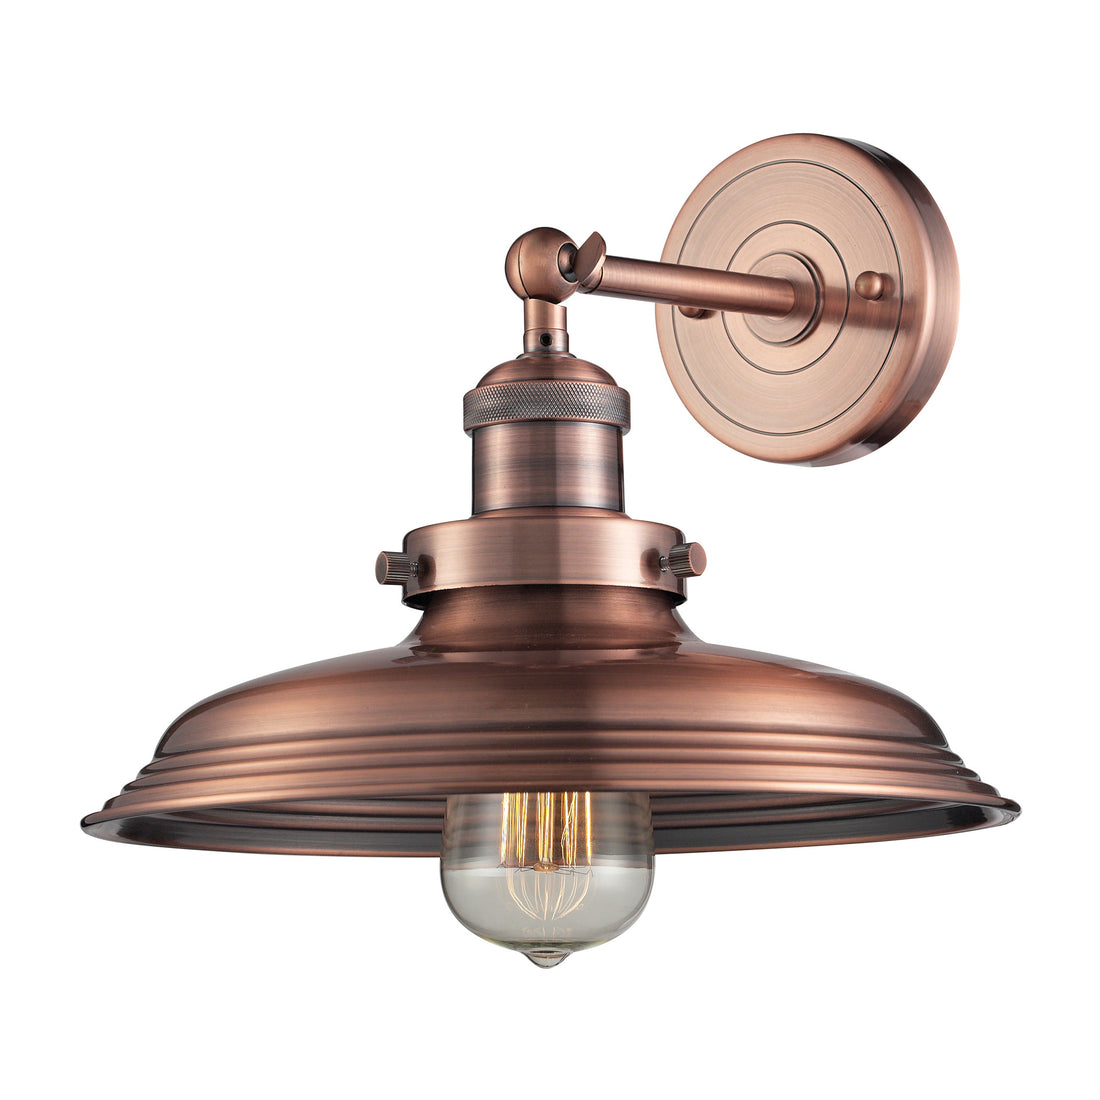 Newberry Wall Sconce in Antique Copper by ELK Lighting 55030-1